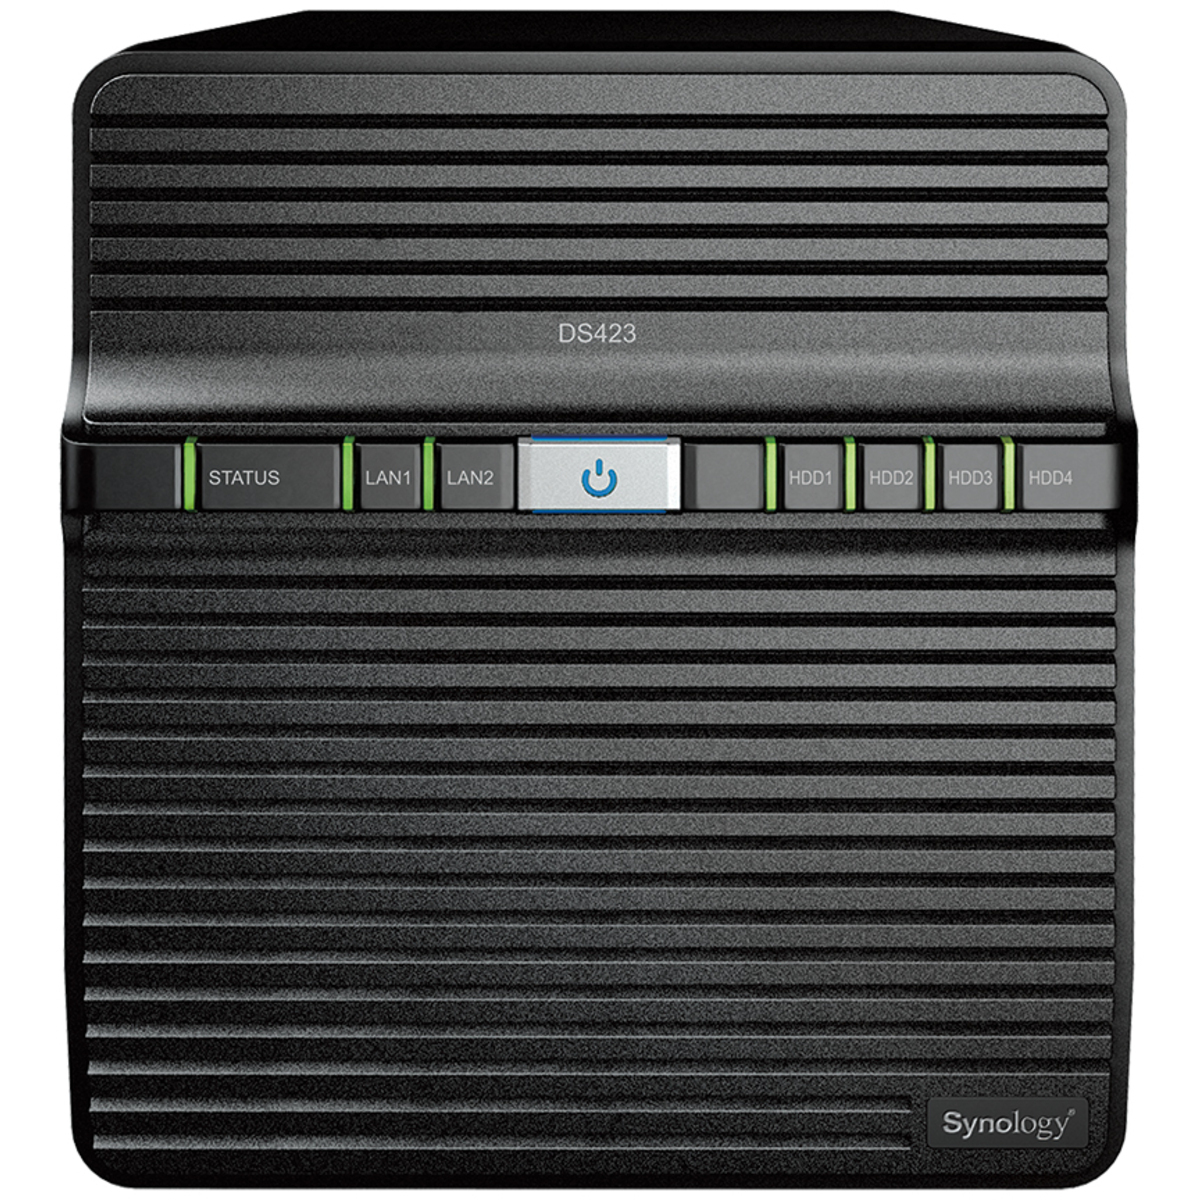 Synology DiskStation DS423 24tb 4-Bay Desktop Personal / Basic Home / Small Office NAS - Network Attached Storage Device 2x12tb Seagate EXOS X18 ST12000NM000J 3.5 7200rpm SATA 6Gb/s HDD ENTERPRISE Class Drives Installed - Burn-In Tested DiskStation DS423